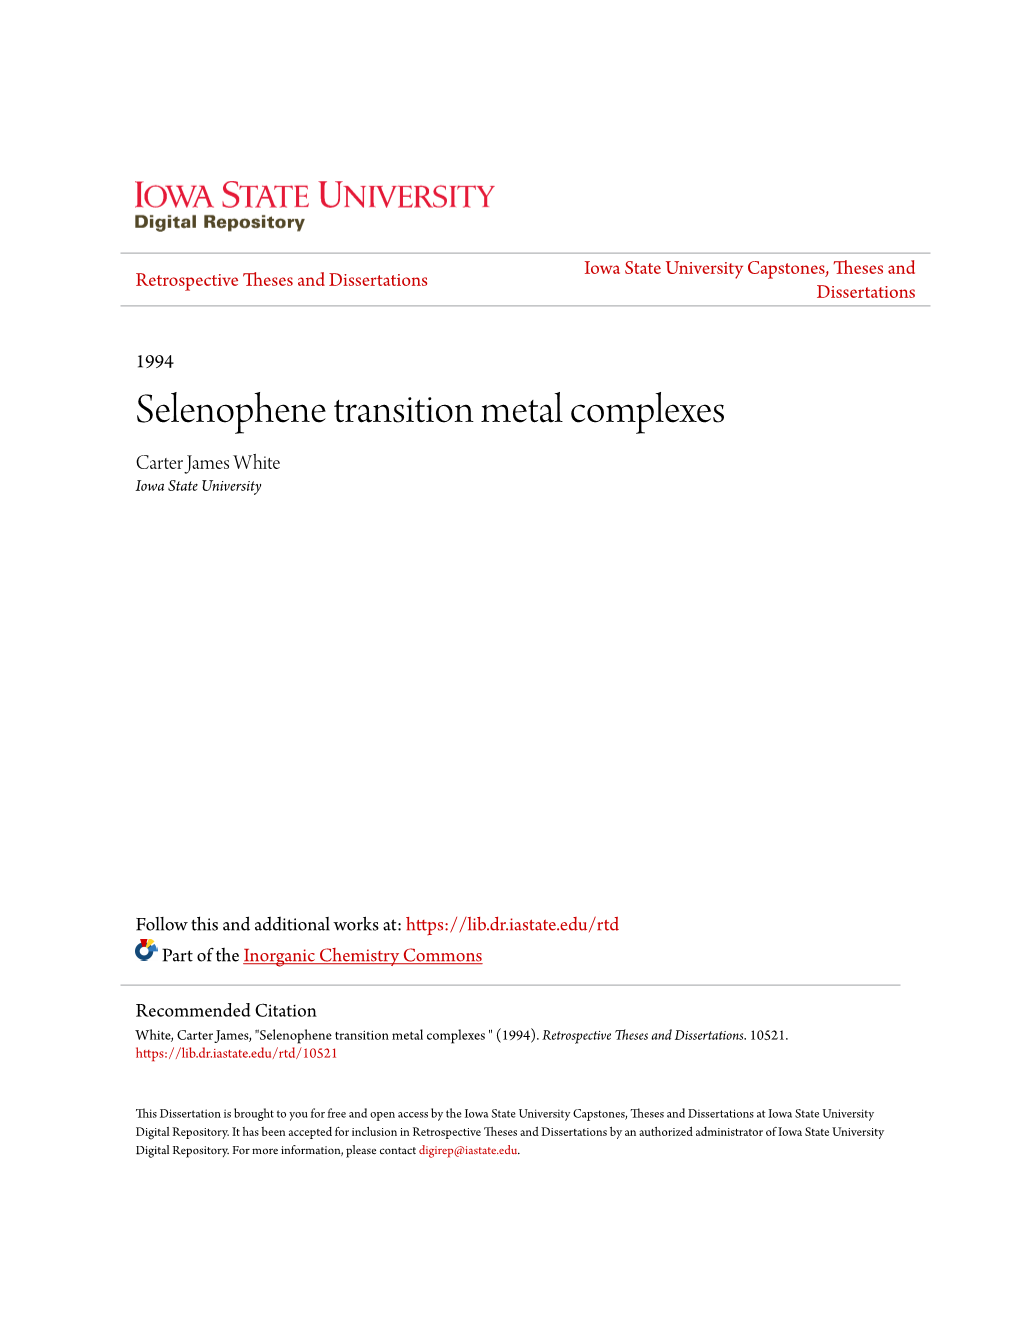 Selenophene Transition Metal Complexes Carter James White Iowa State University